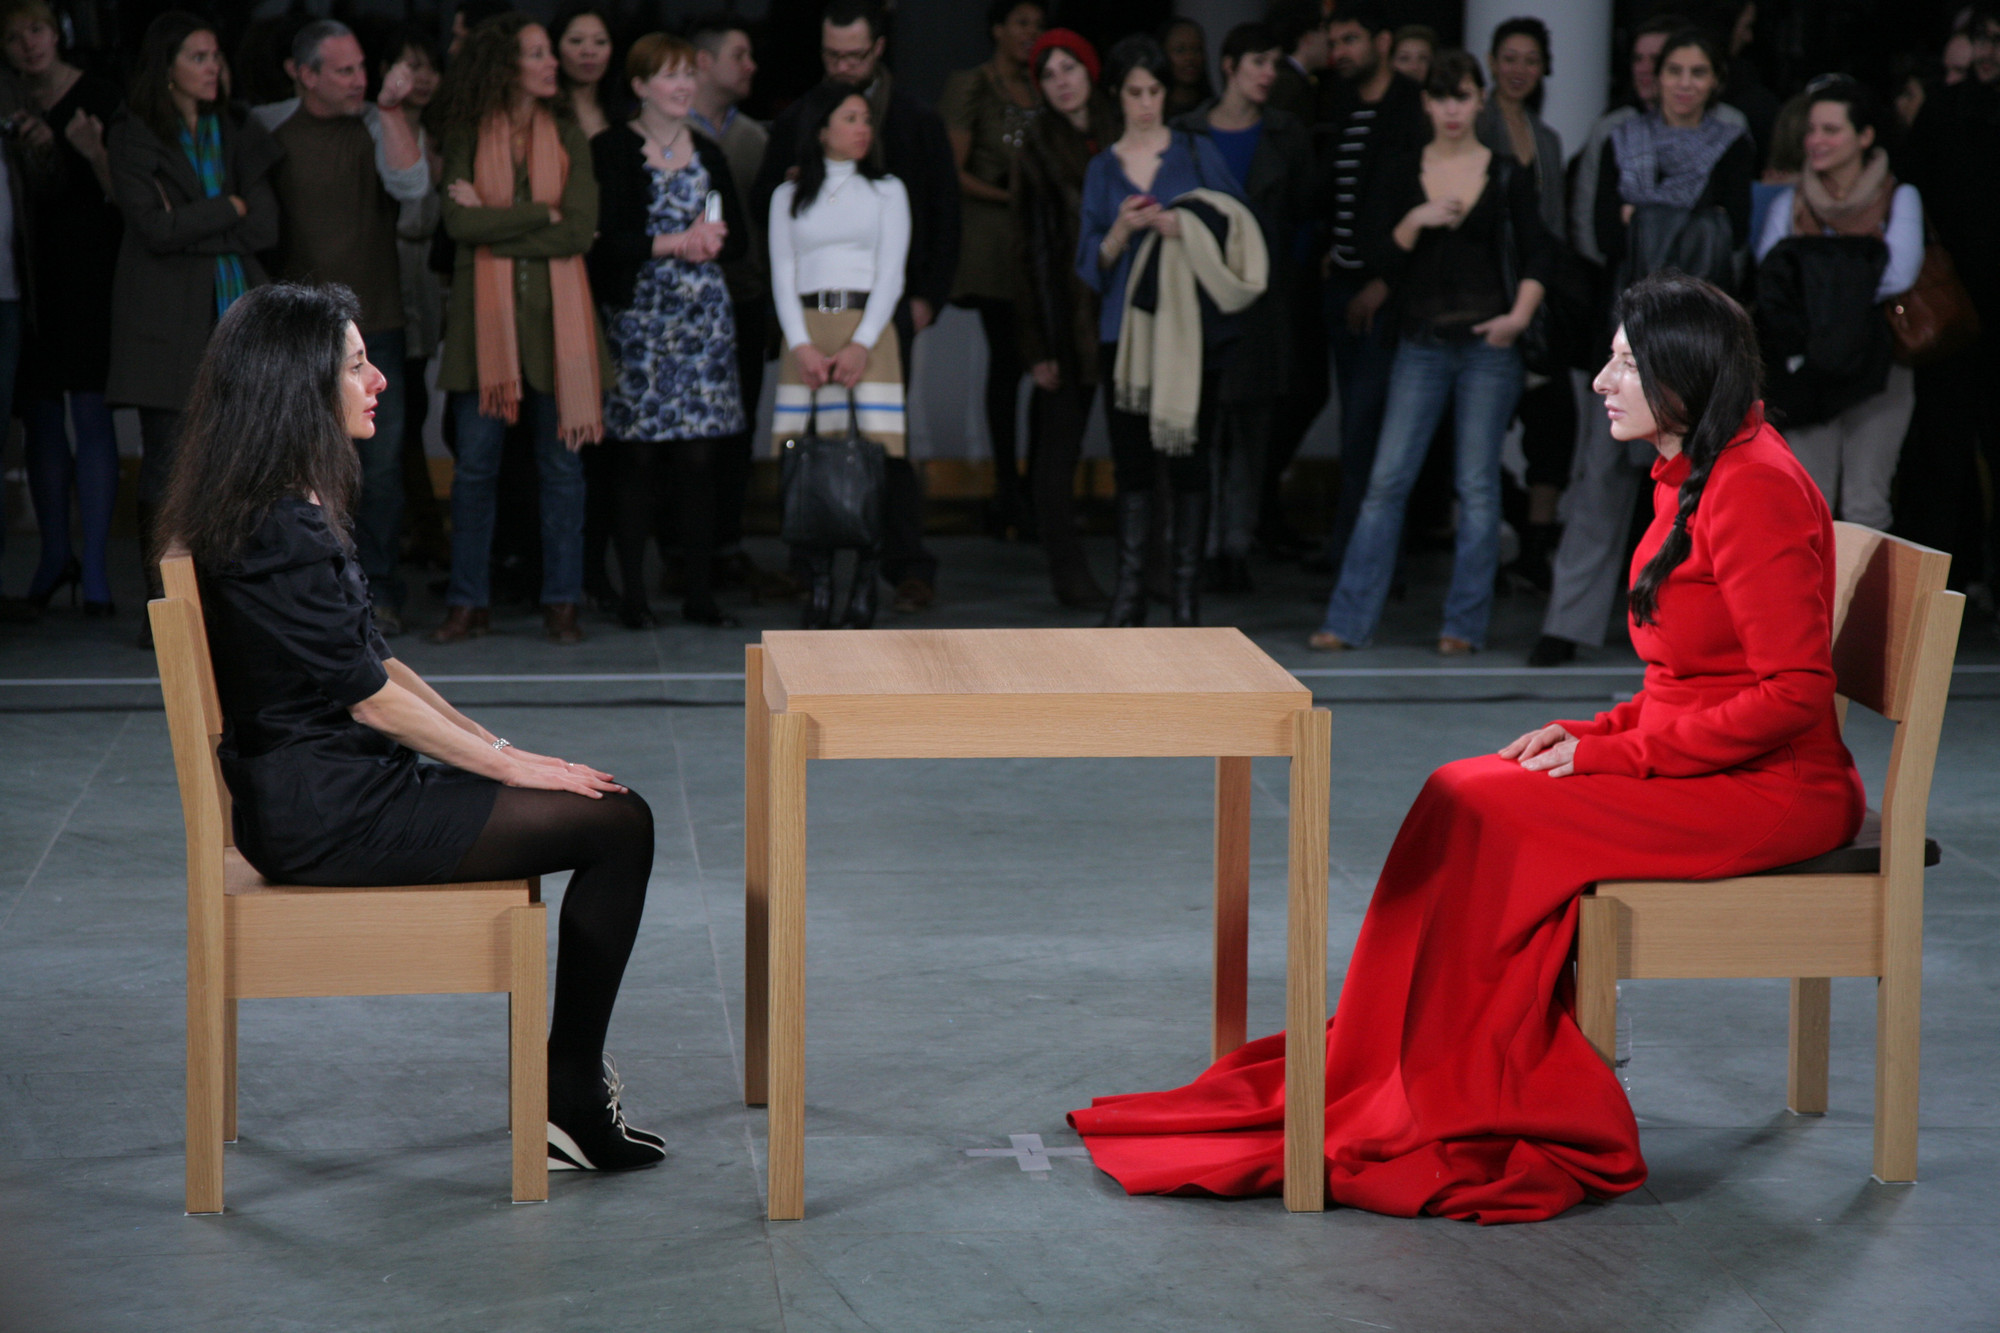 Installation view of Marina Abramović’s performance _The Artist Is Present_ at The Museum of Modern Art, 2010. Photo by Scott Rudd. For her longest solo piece to date, Abramović will sit in silence at a table in the Museum’s Donald B. and Catherine C. Marron Atrium during public hours, passively inviting visitors to take the seat across from her for as long as they choose within the timeframe of the Museum’s hours of operation. Although she will not respond, participation by Museum visitors completes the piece and allows them to have a personal experience with the artist and the artwork. © 2010 Marina Abramović. Courtesy the artist and Sean Kelly Gallery/Artists Rights Society (ARS), New York